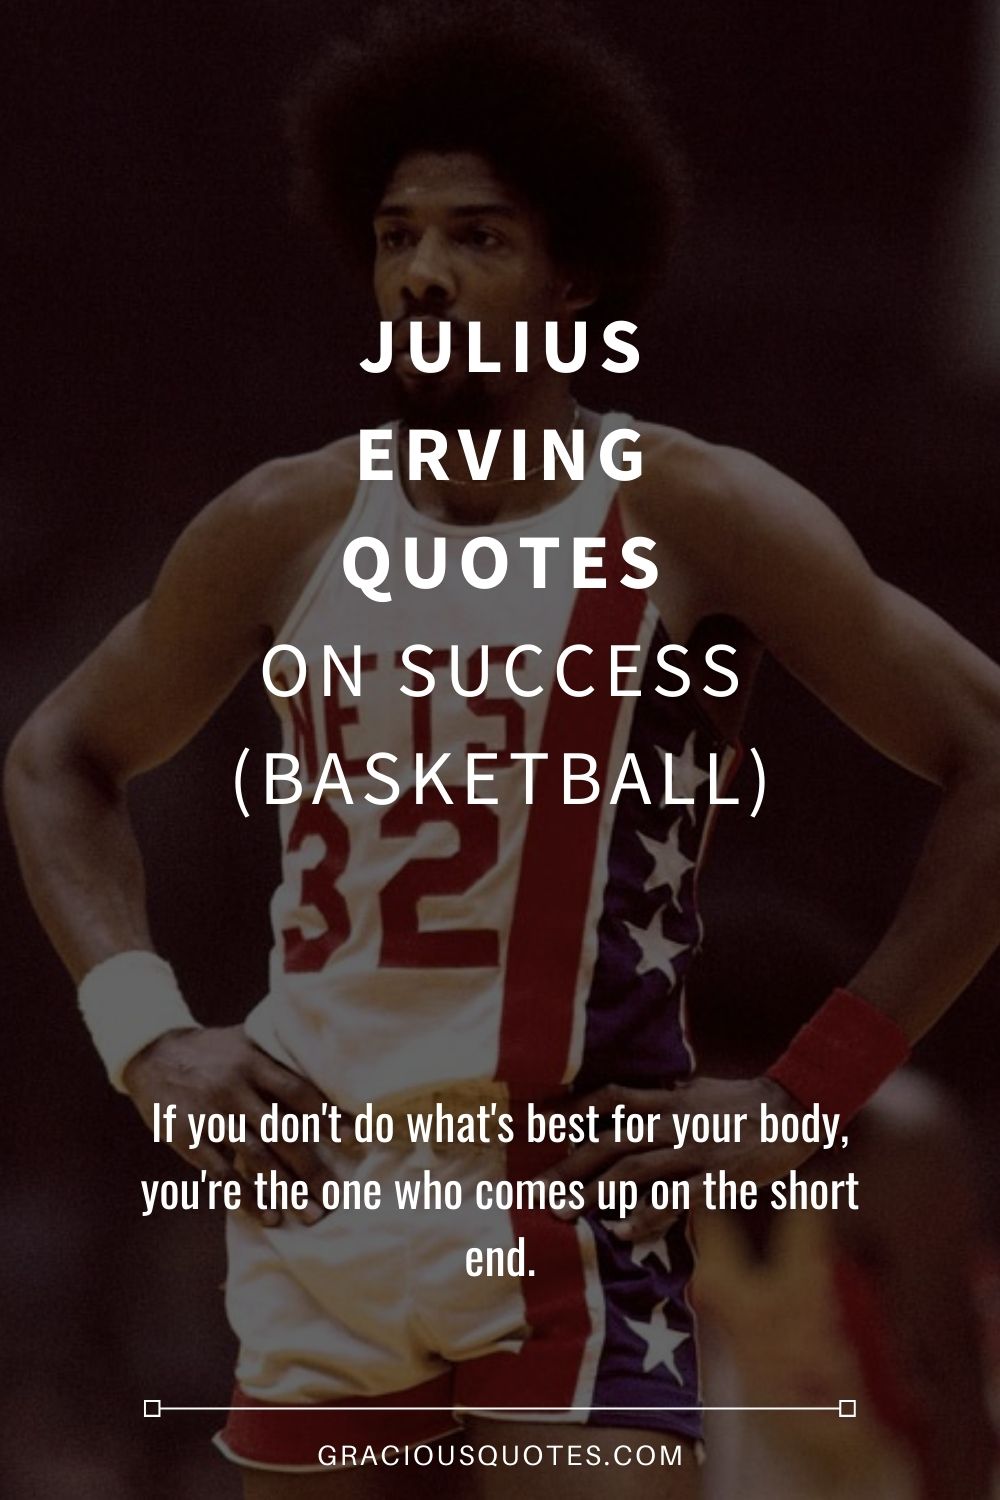 Julius Erving Quote: “Right up until the time I retired at age 37